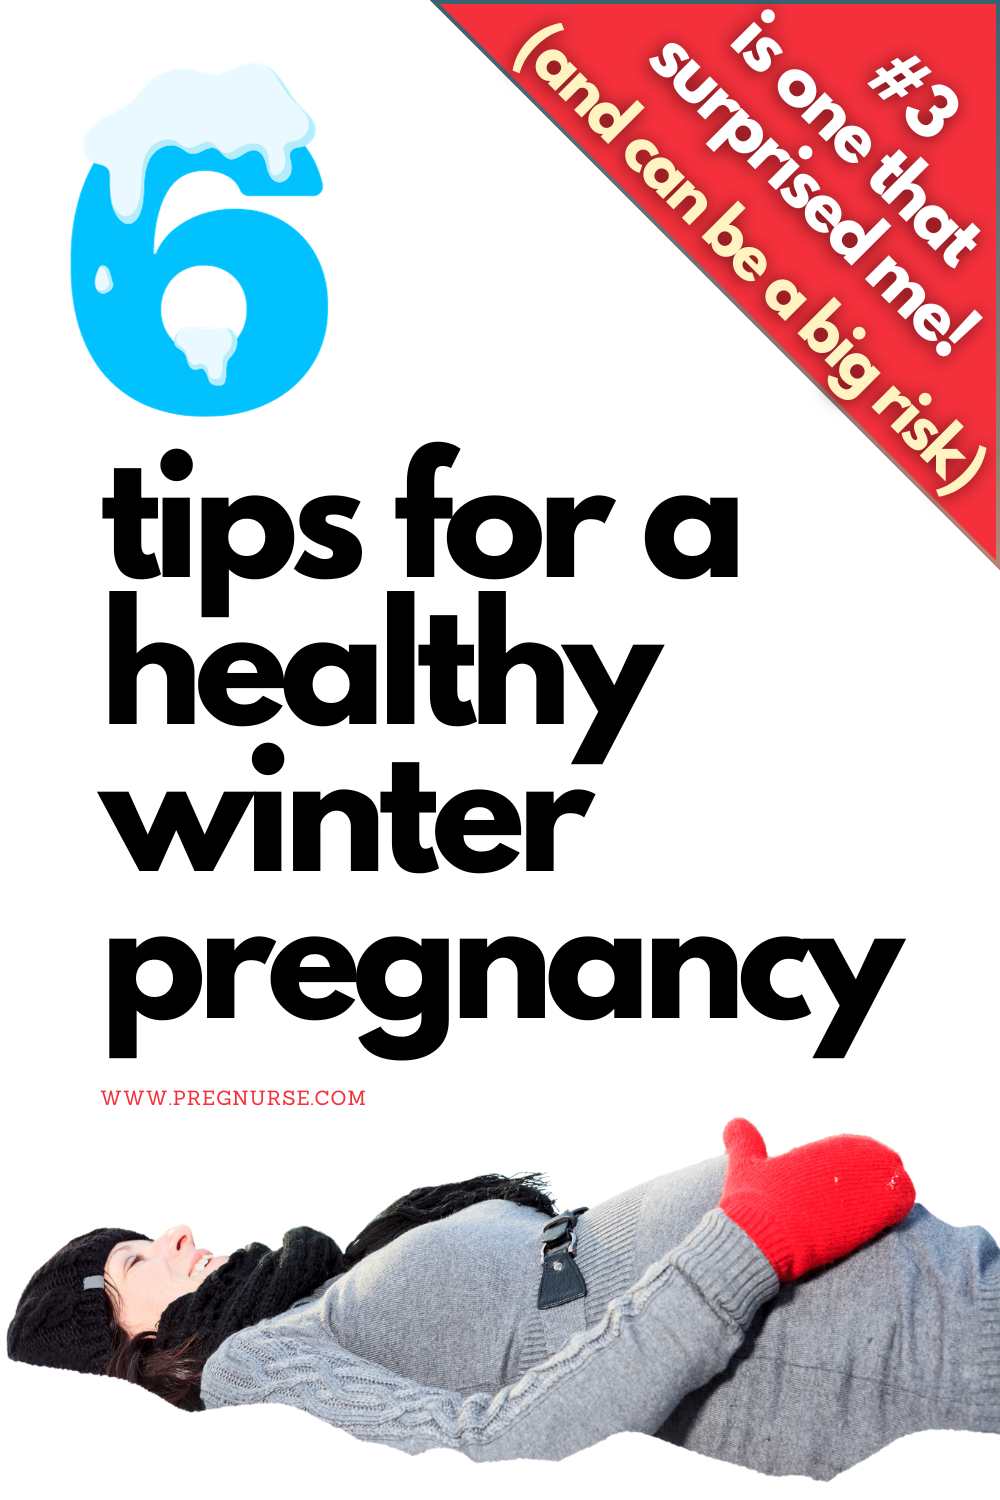 5 tips for a healthy winter pregnancy, pregnant woman laying in the snow / #3 really surprised me (and can be a big risk)